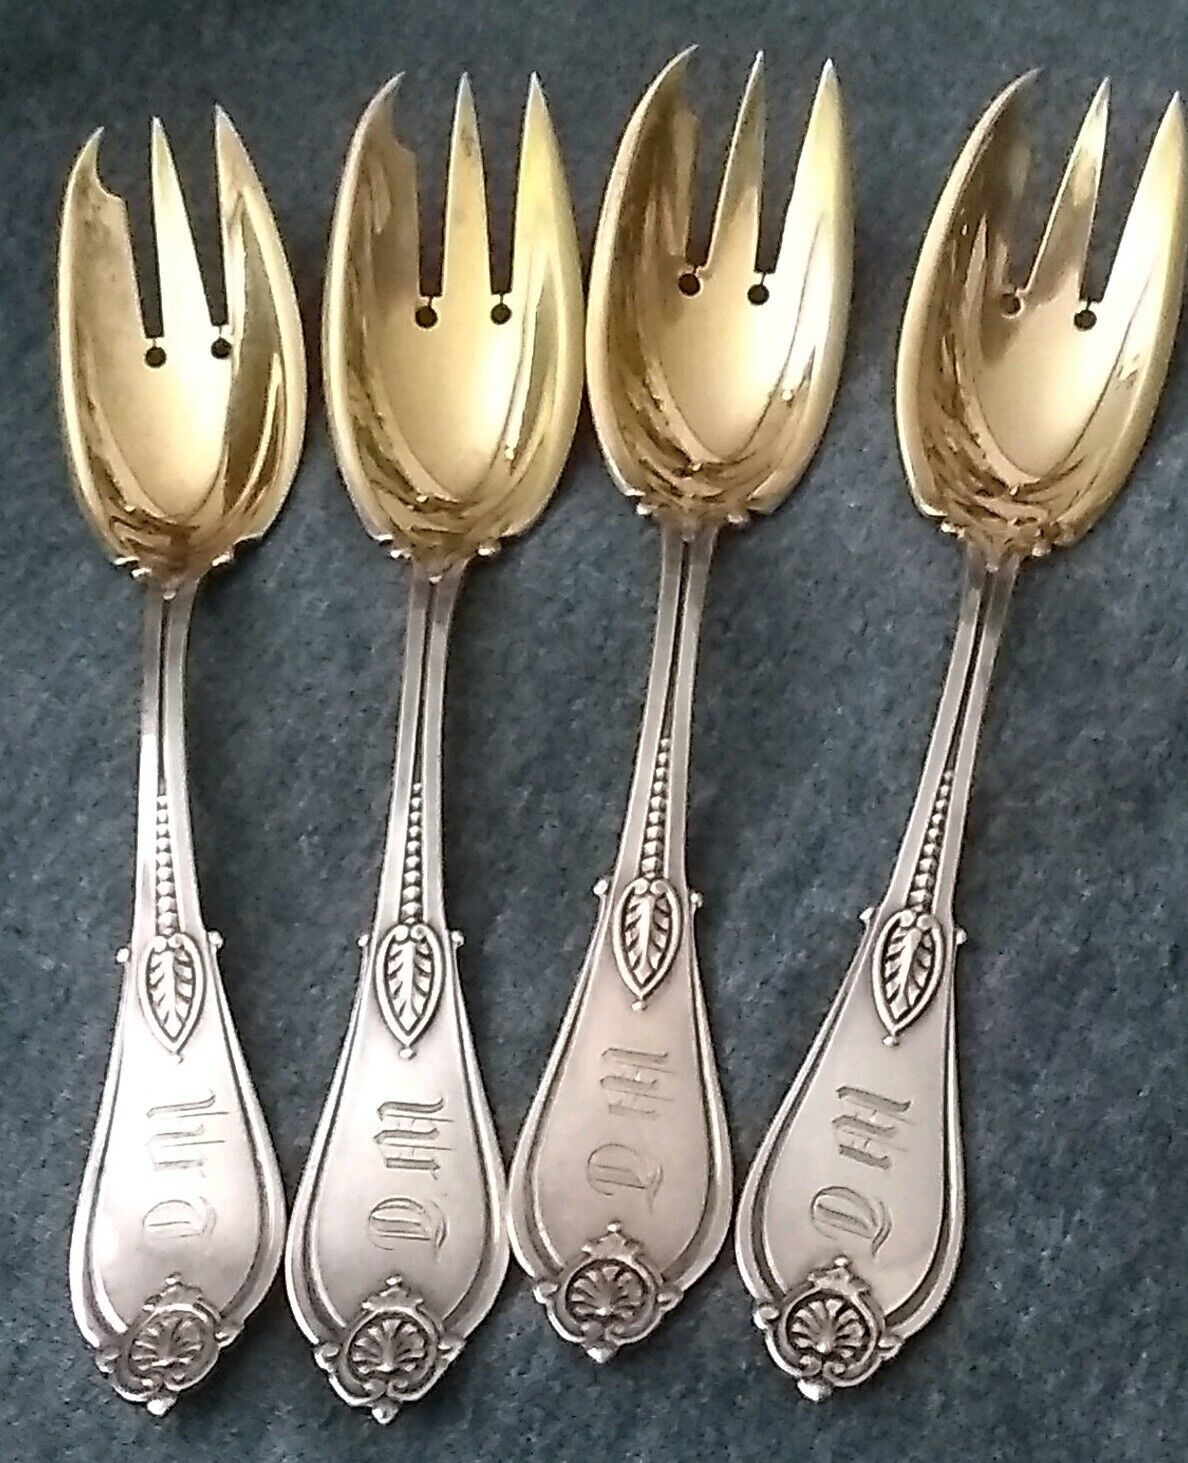 4 Beautiful Antique Sterling Oyster Forks Gold Wash Bowl & Tines Pat Appl For 